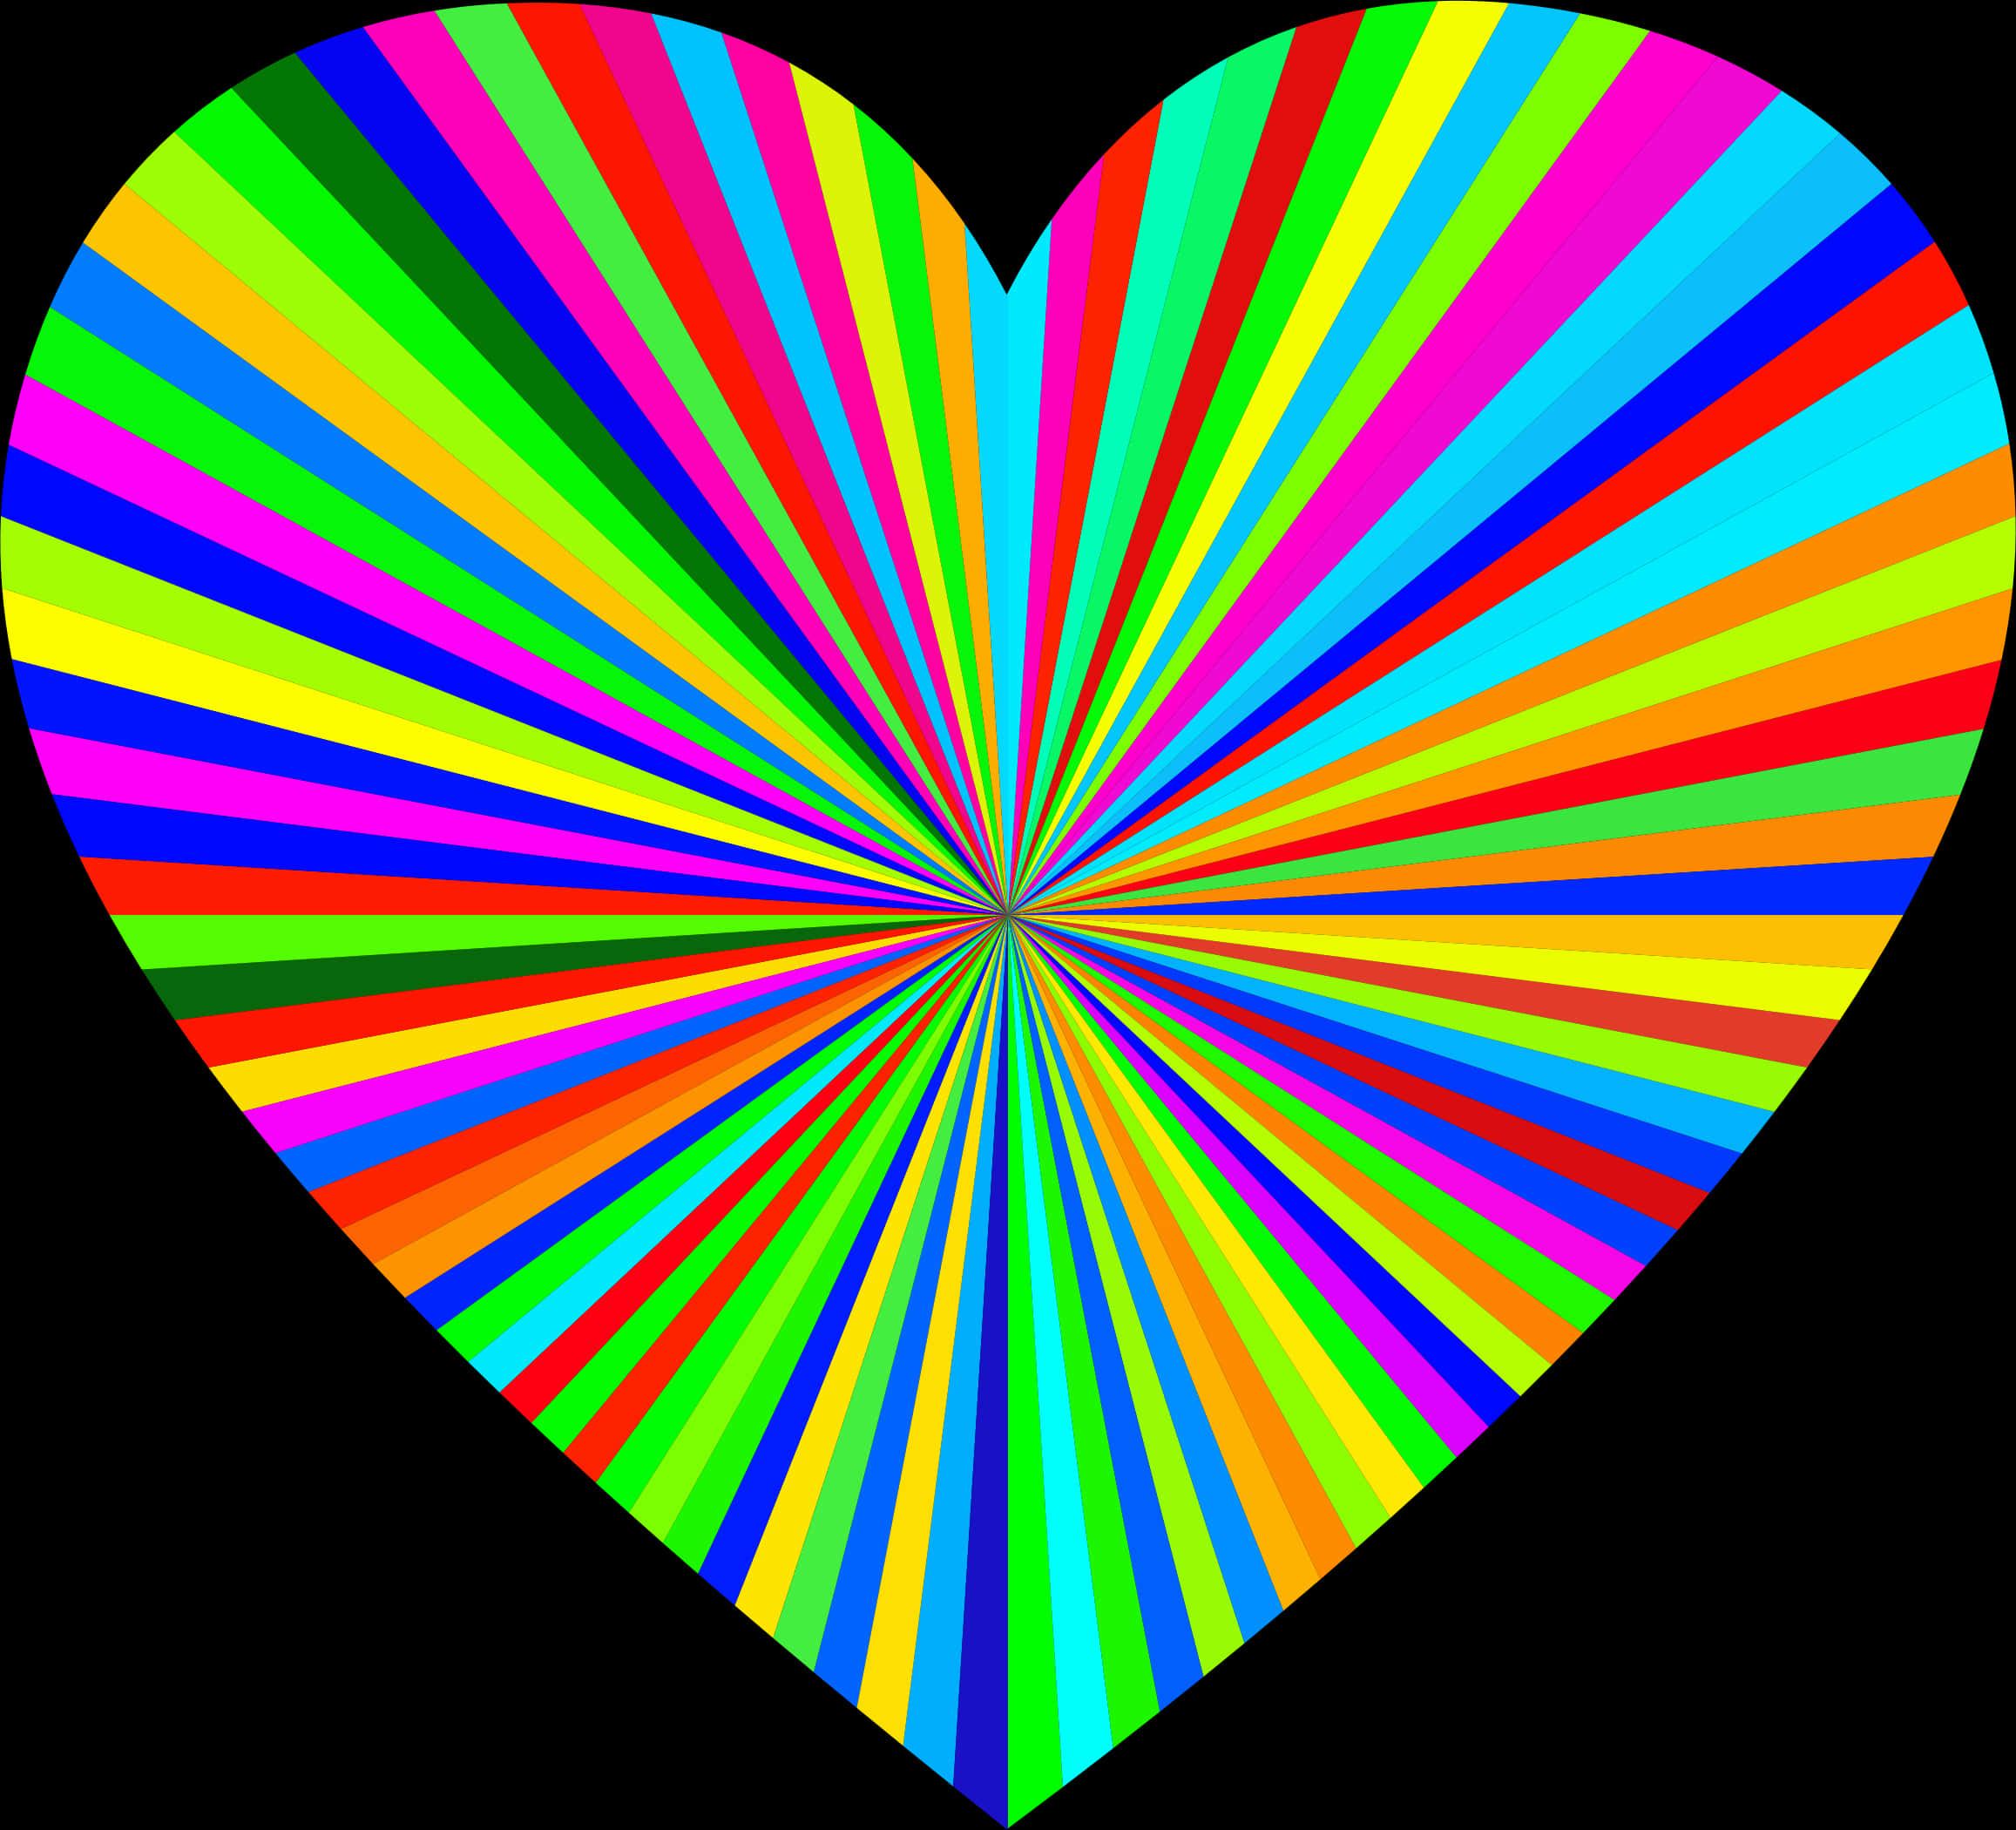 Colorful Heart Starburst Pattern PNG